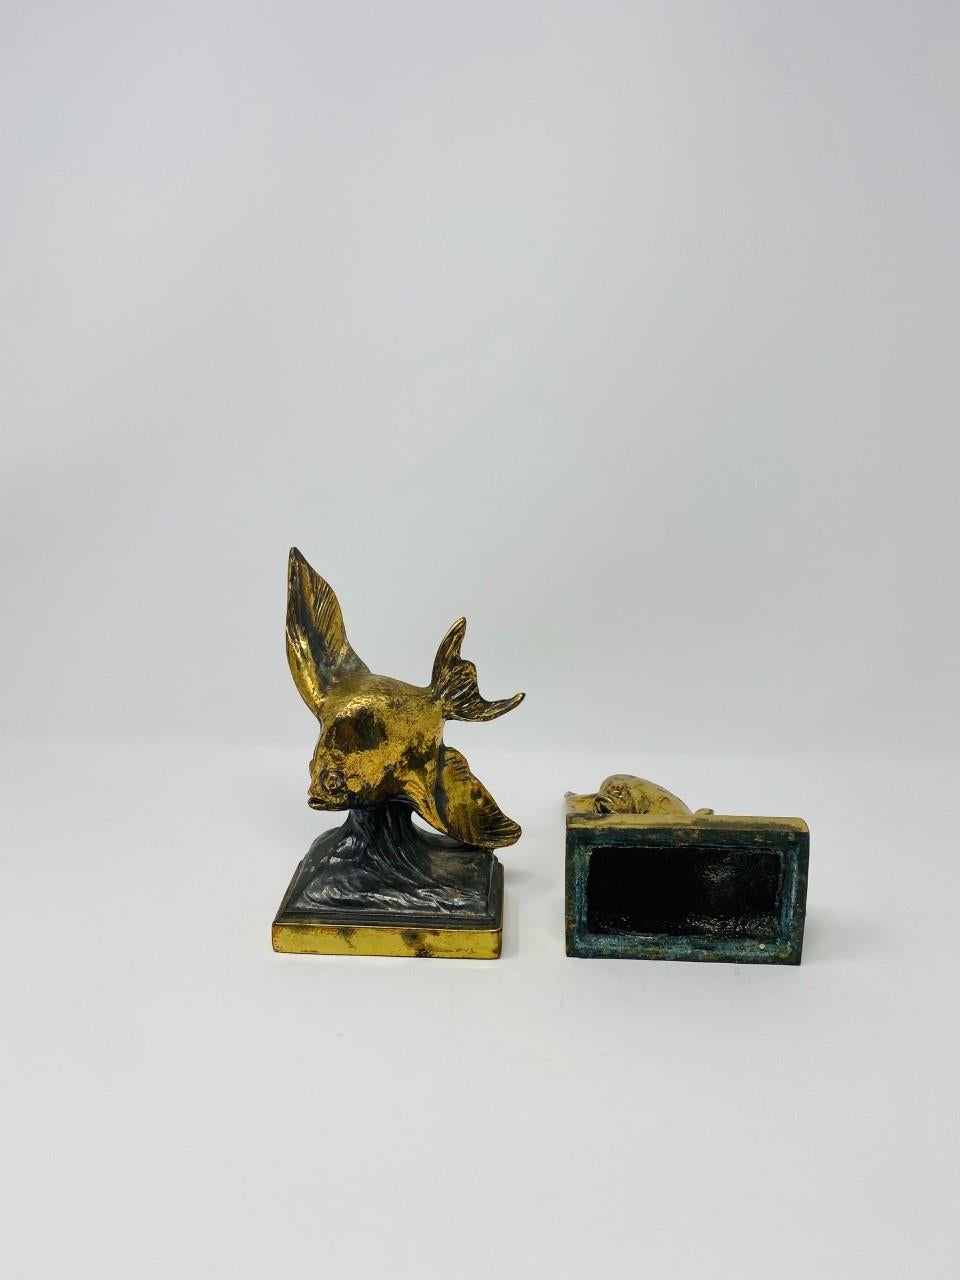 Vintage Rare Pair of Brass Flying Fish Bookends, 1930s For Sale 2